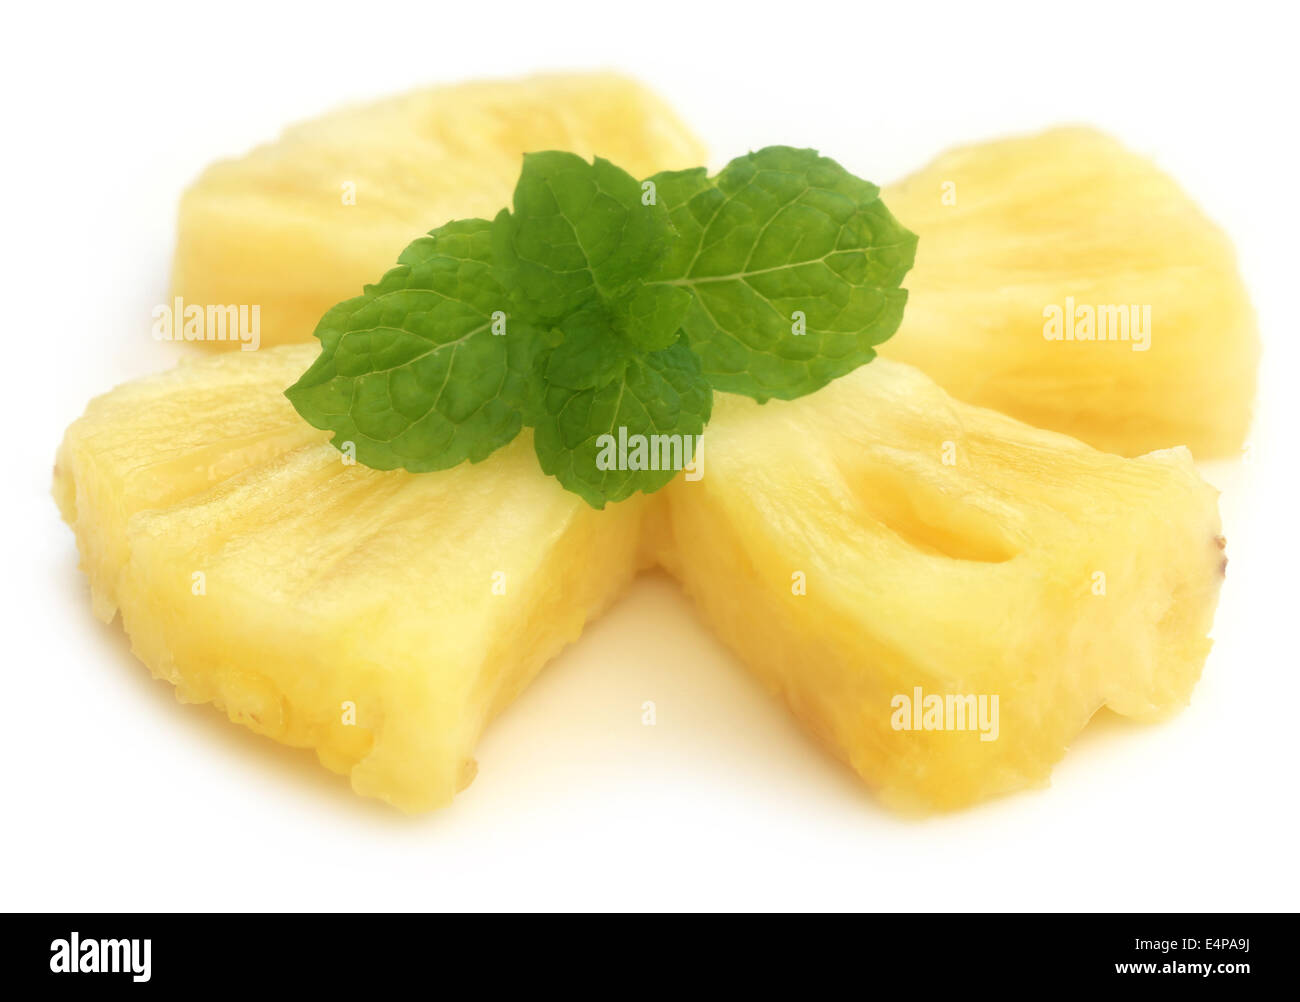 Sliced pineapple with mint leaves over whtie background Stock Photo